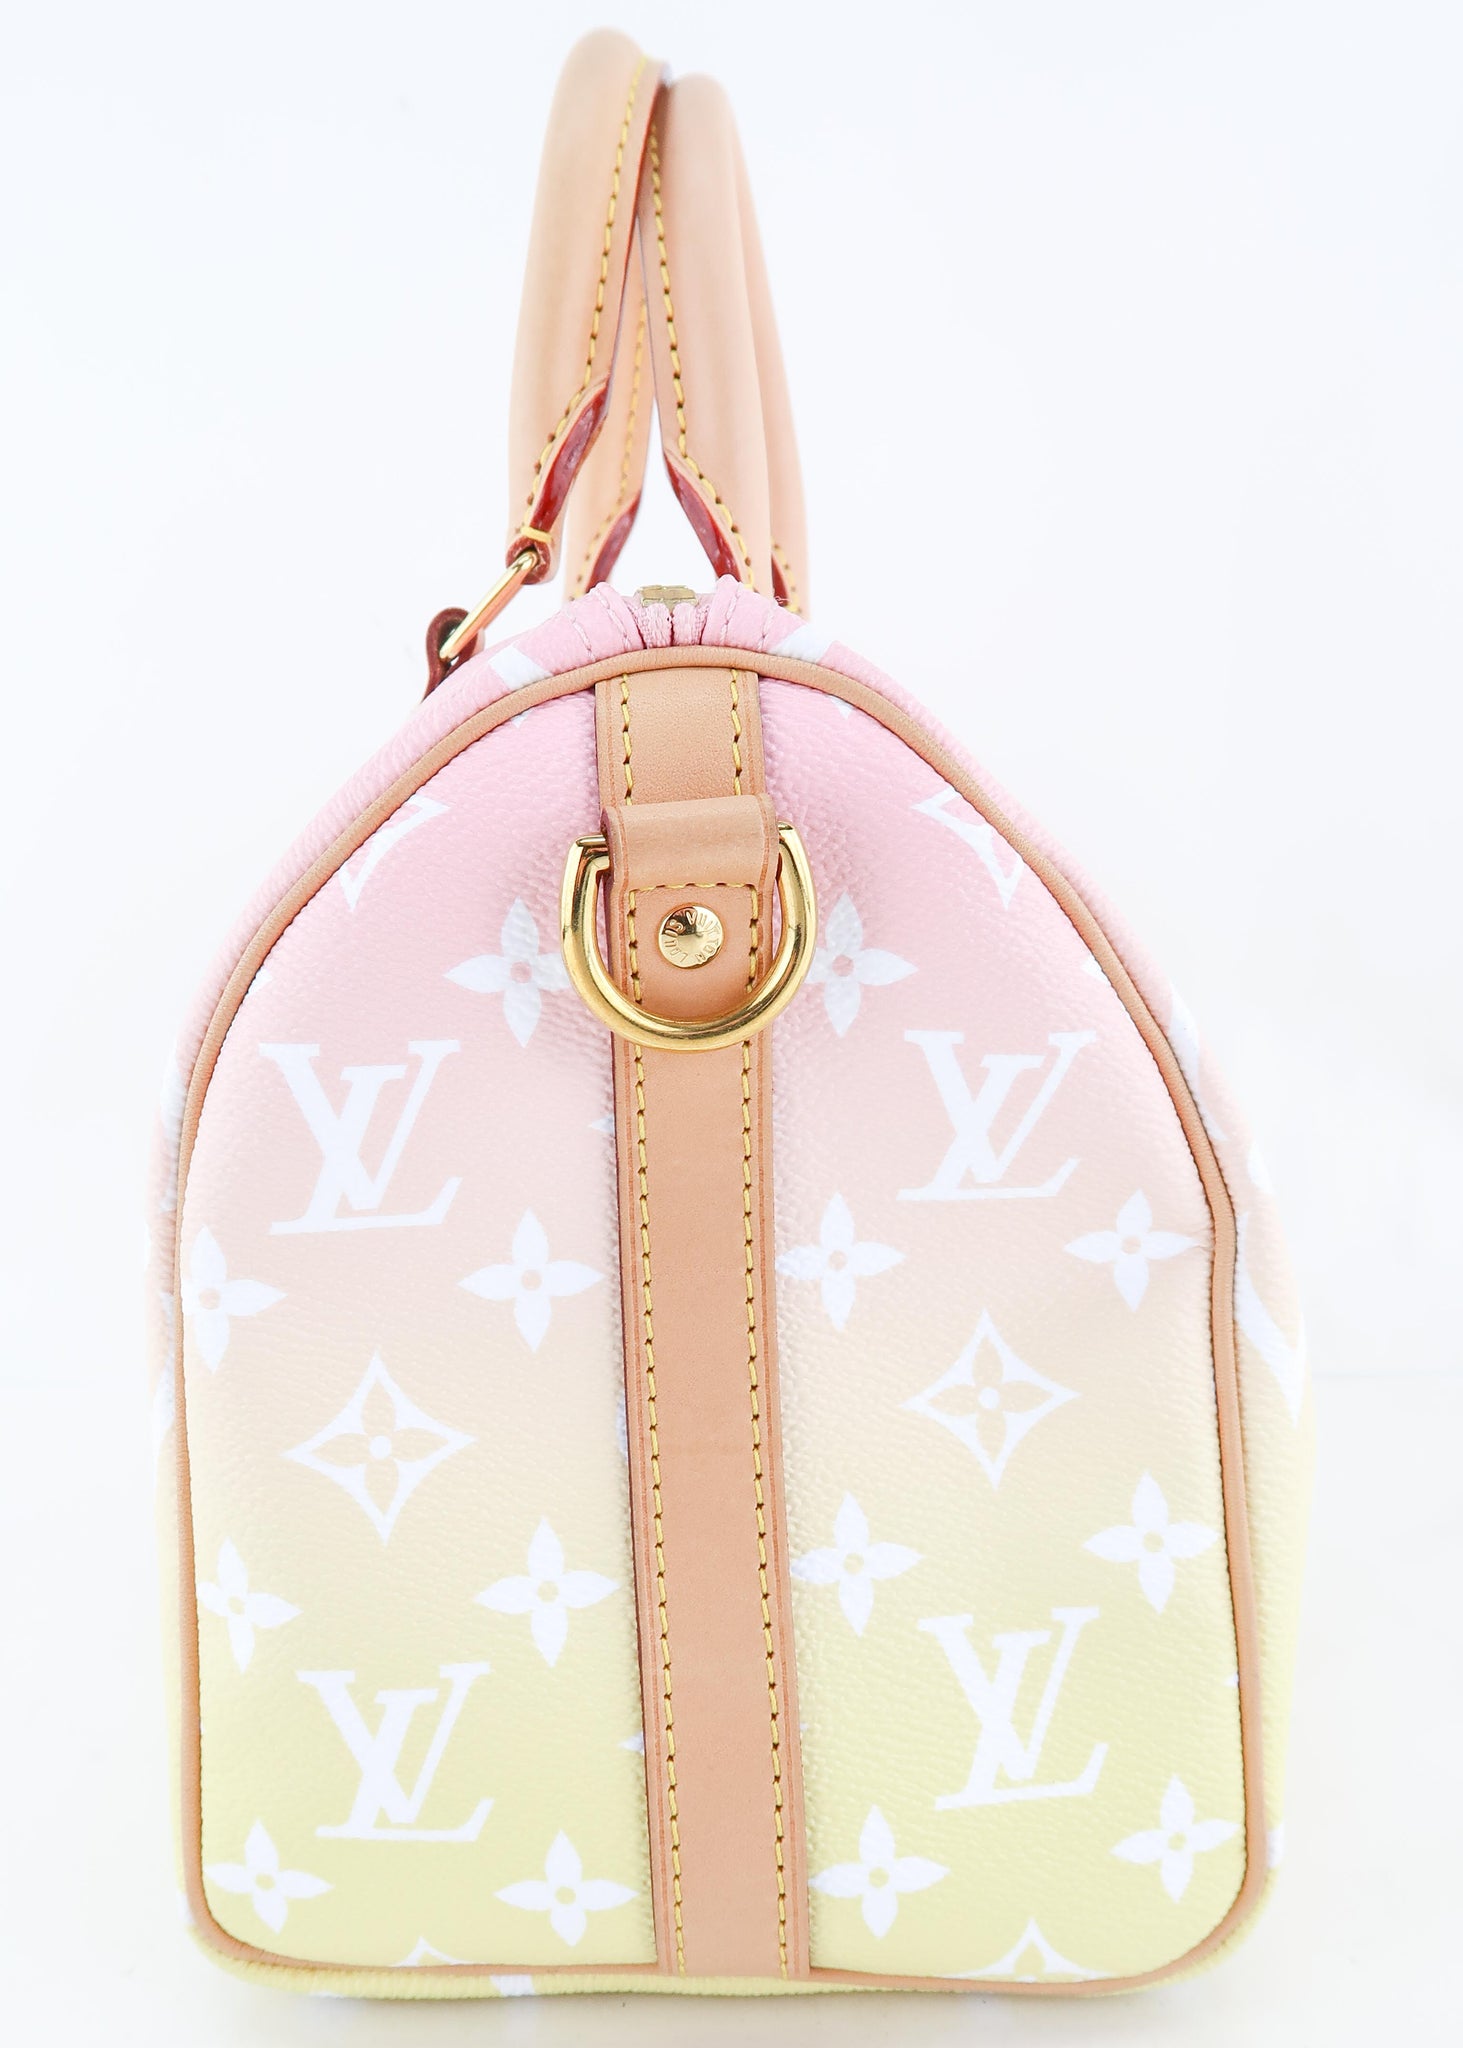 Louis Vuitton Speedy Bandouliere Bag By The Pool Monogram